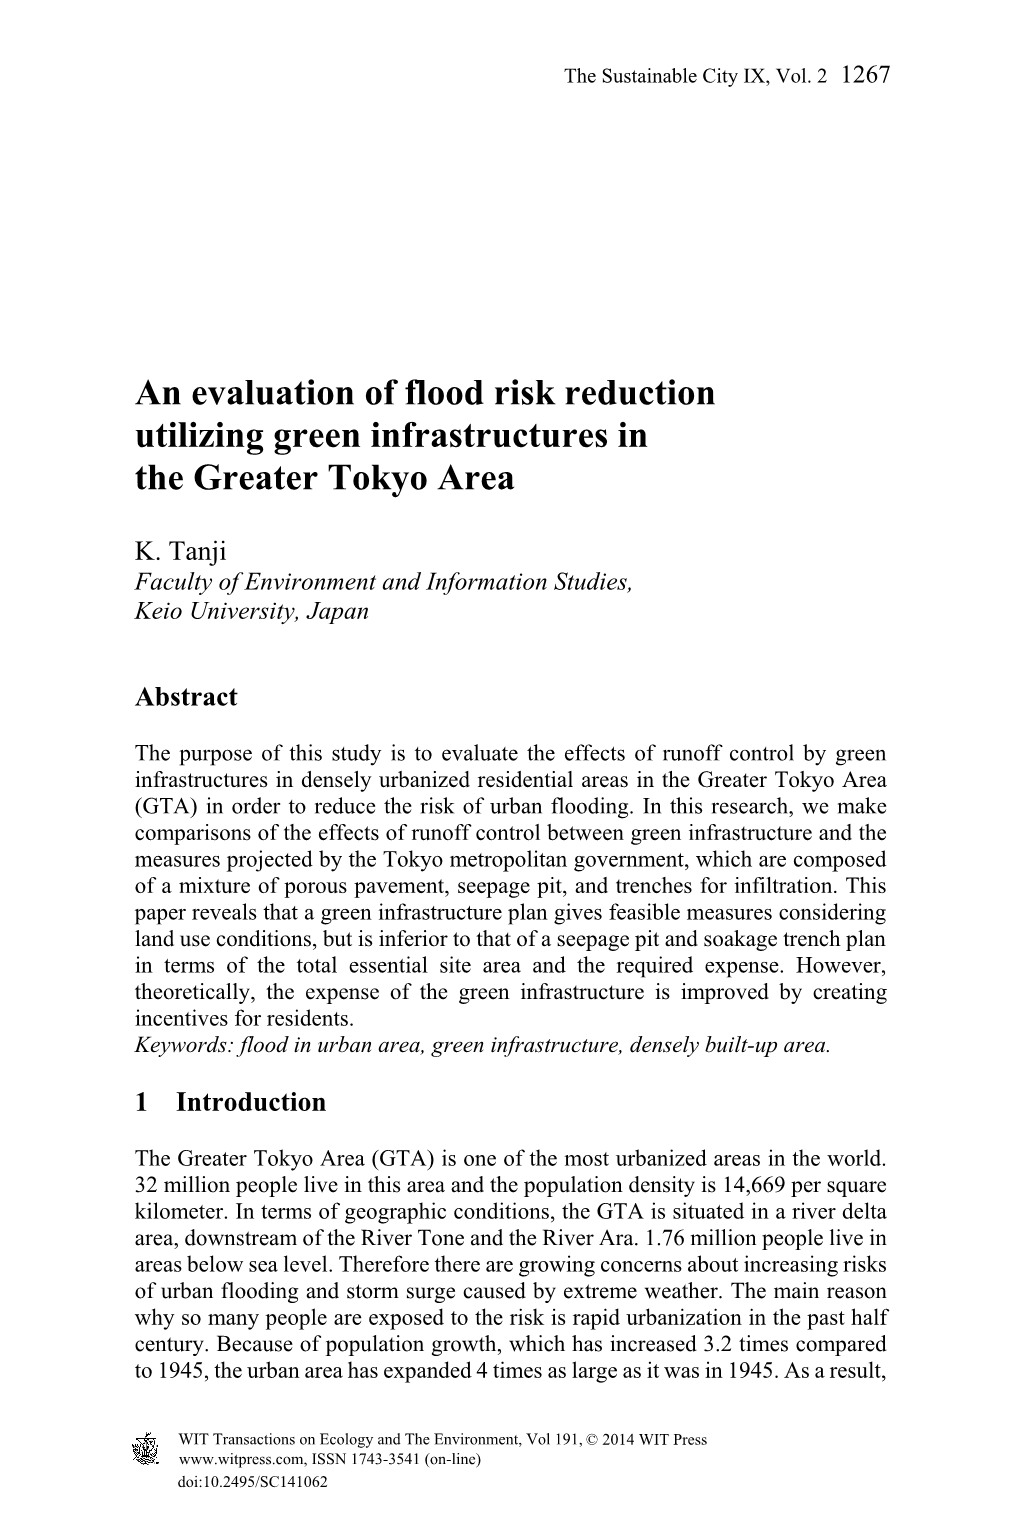 An Evaluation of Flood Risk Reduction Utilizing Green Infrastructures in the Greater Tokyo Area